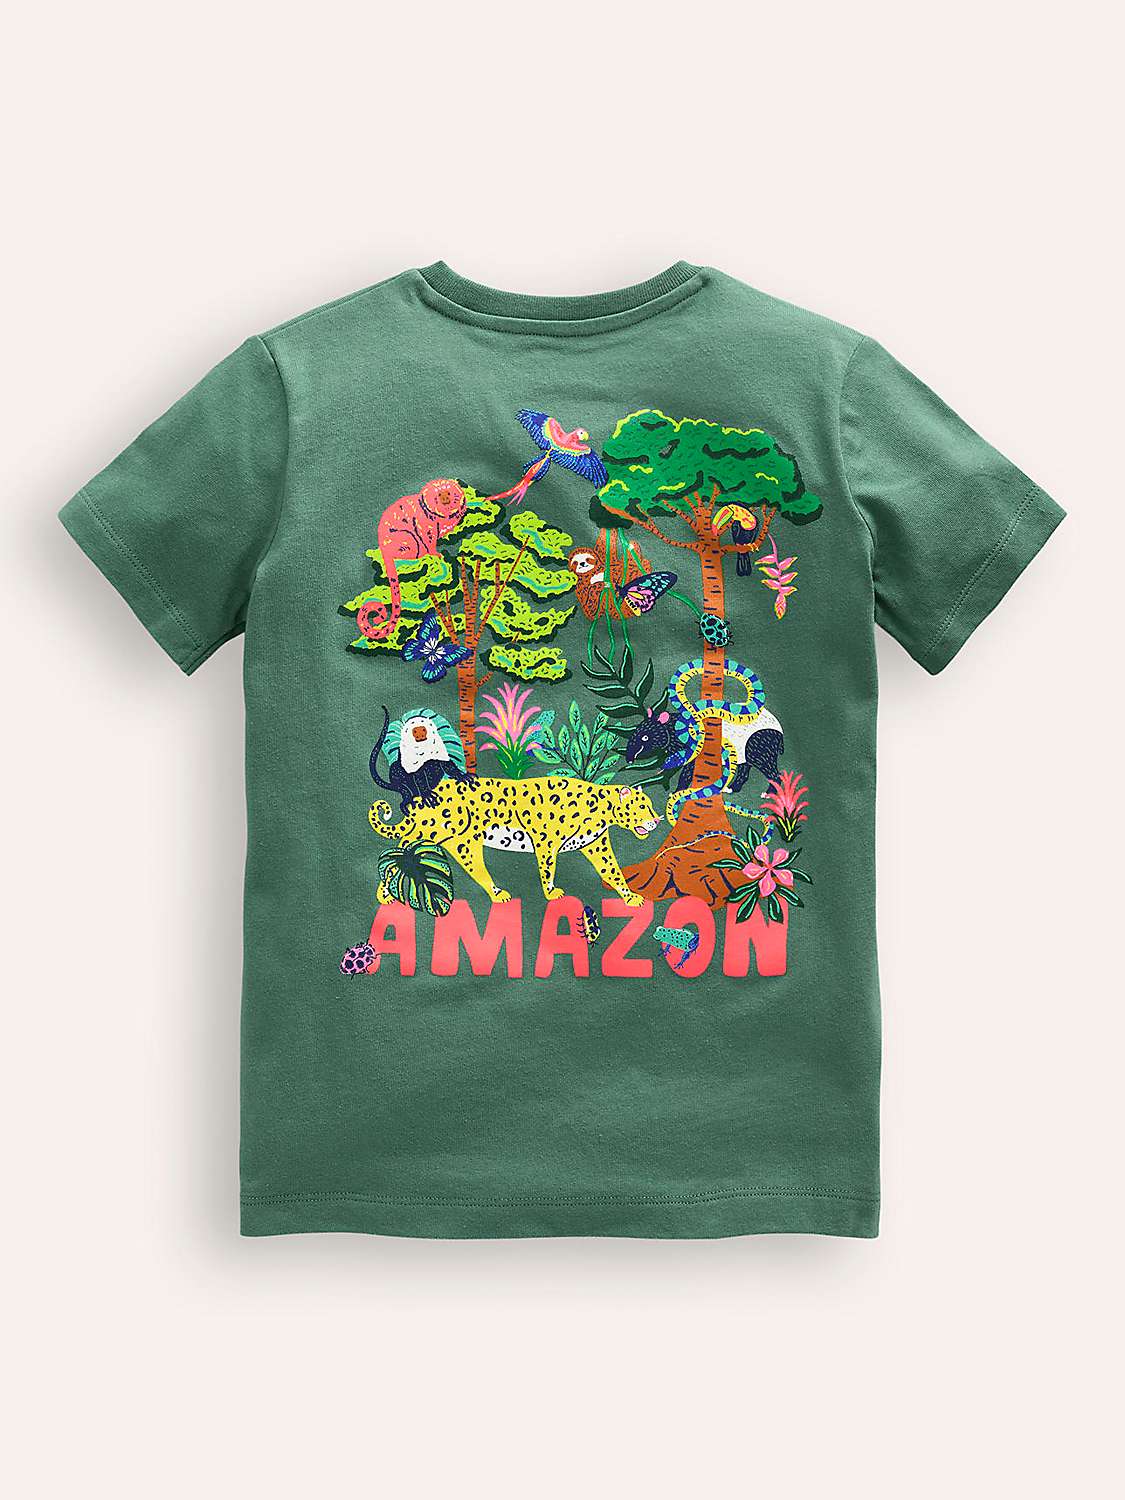 Buy Mini Boden Kids' Front & Back Amazon Print T-Shirt, Spruce Green Online at johnlewis.com